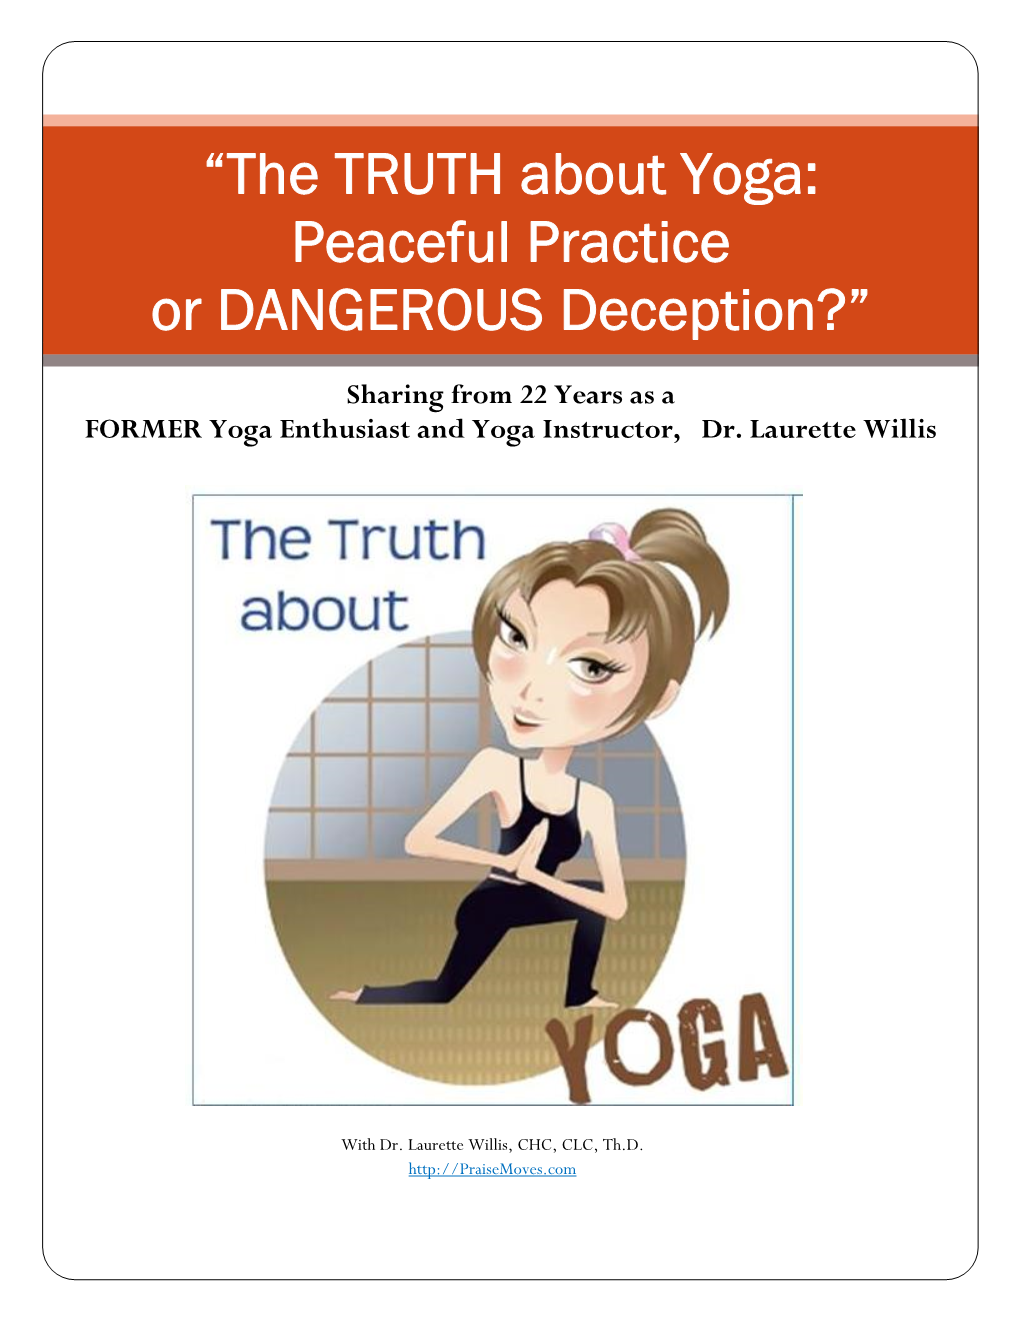 The TRUTH About Yoga: Peaceful Practice Or DANGEROUS Deception?”